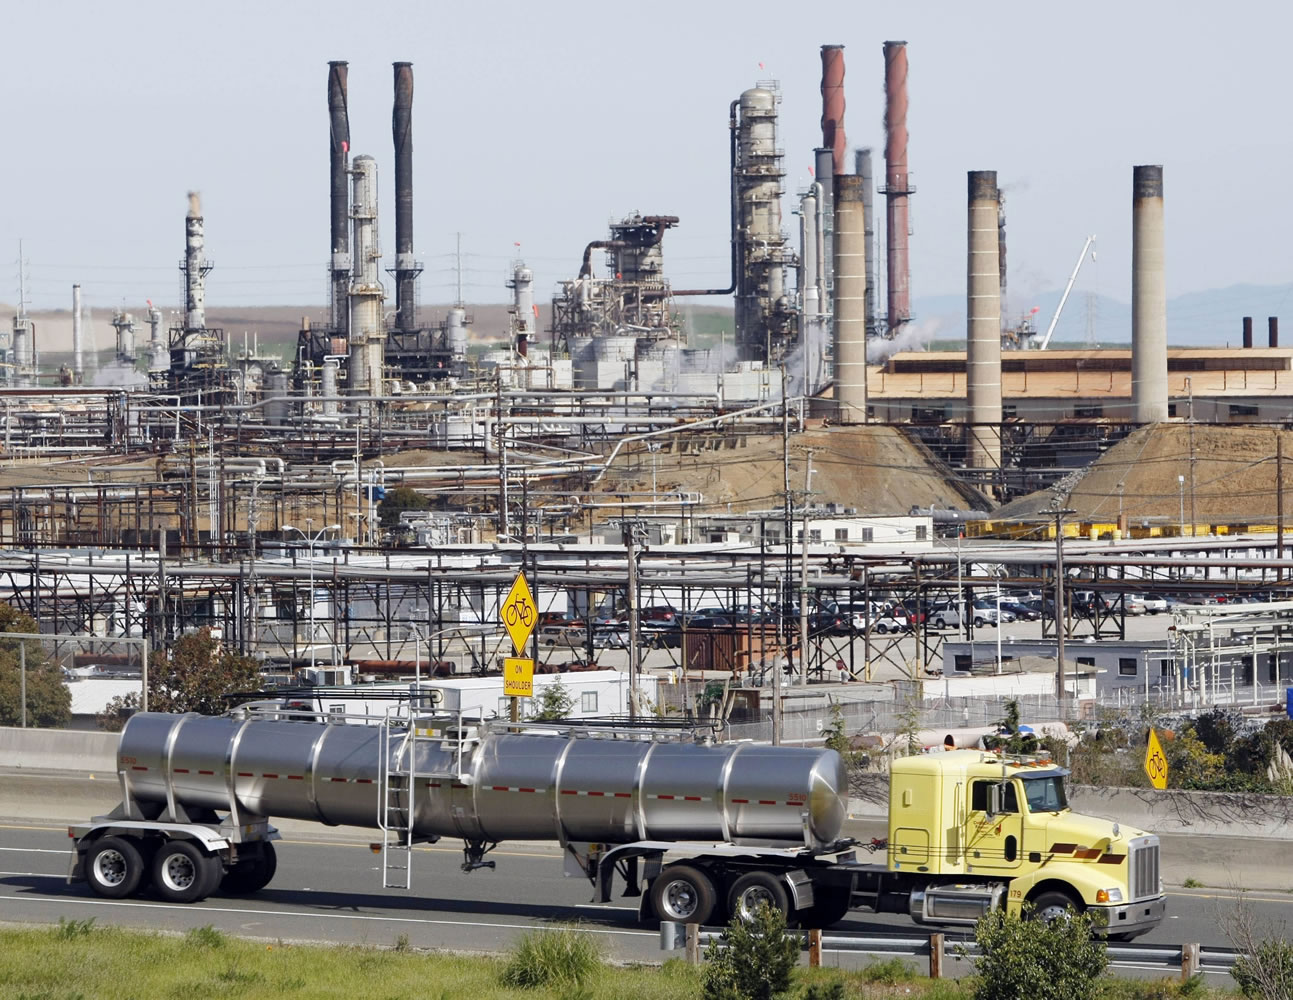 A tanker truck passes an oil refinery in Richmond, Calif. The Environmental Protection Agency announced new rules Tuesday to reduce toxic air pollution from oil refineries by forcing operators to adopt new technology that better monitors and controls emissions.